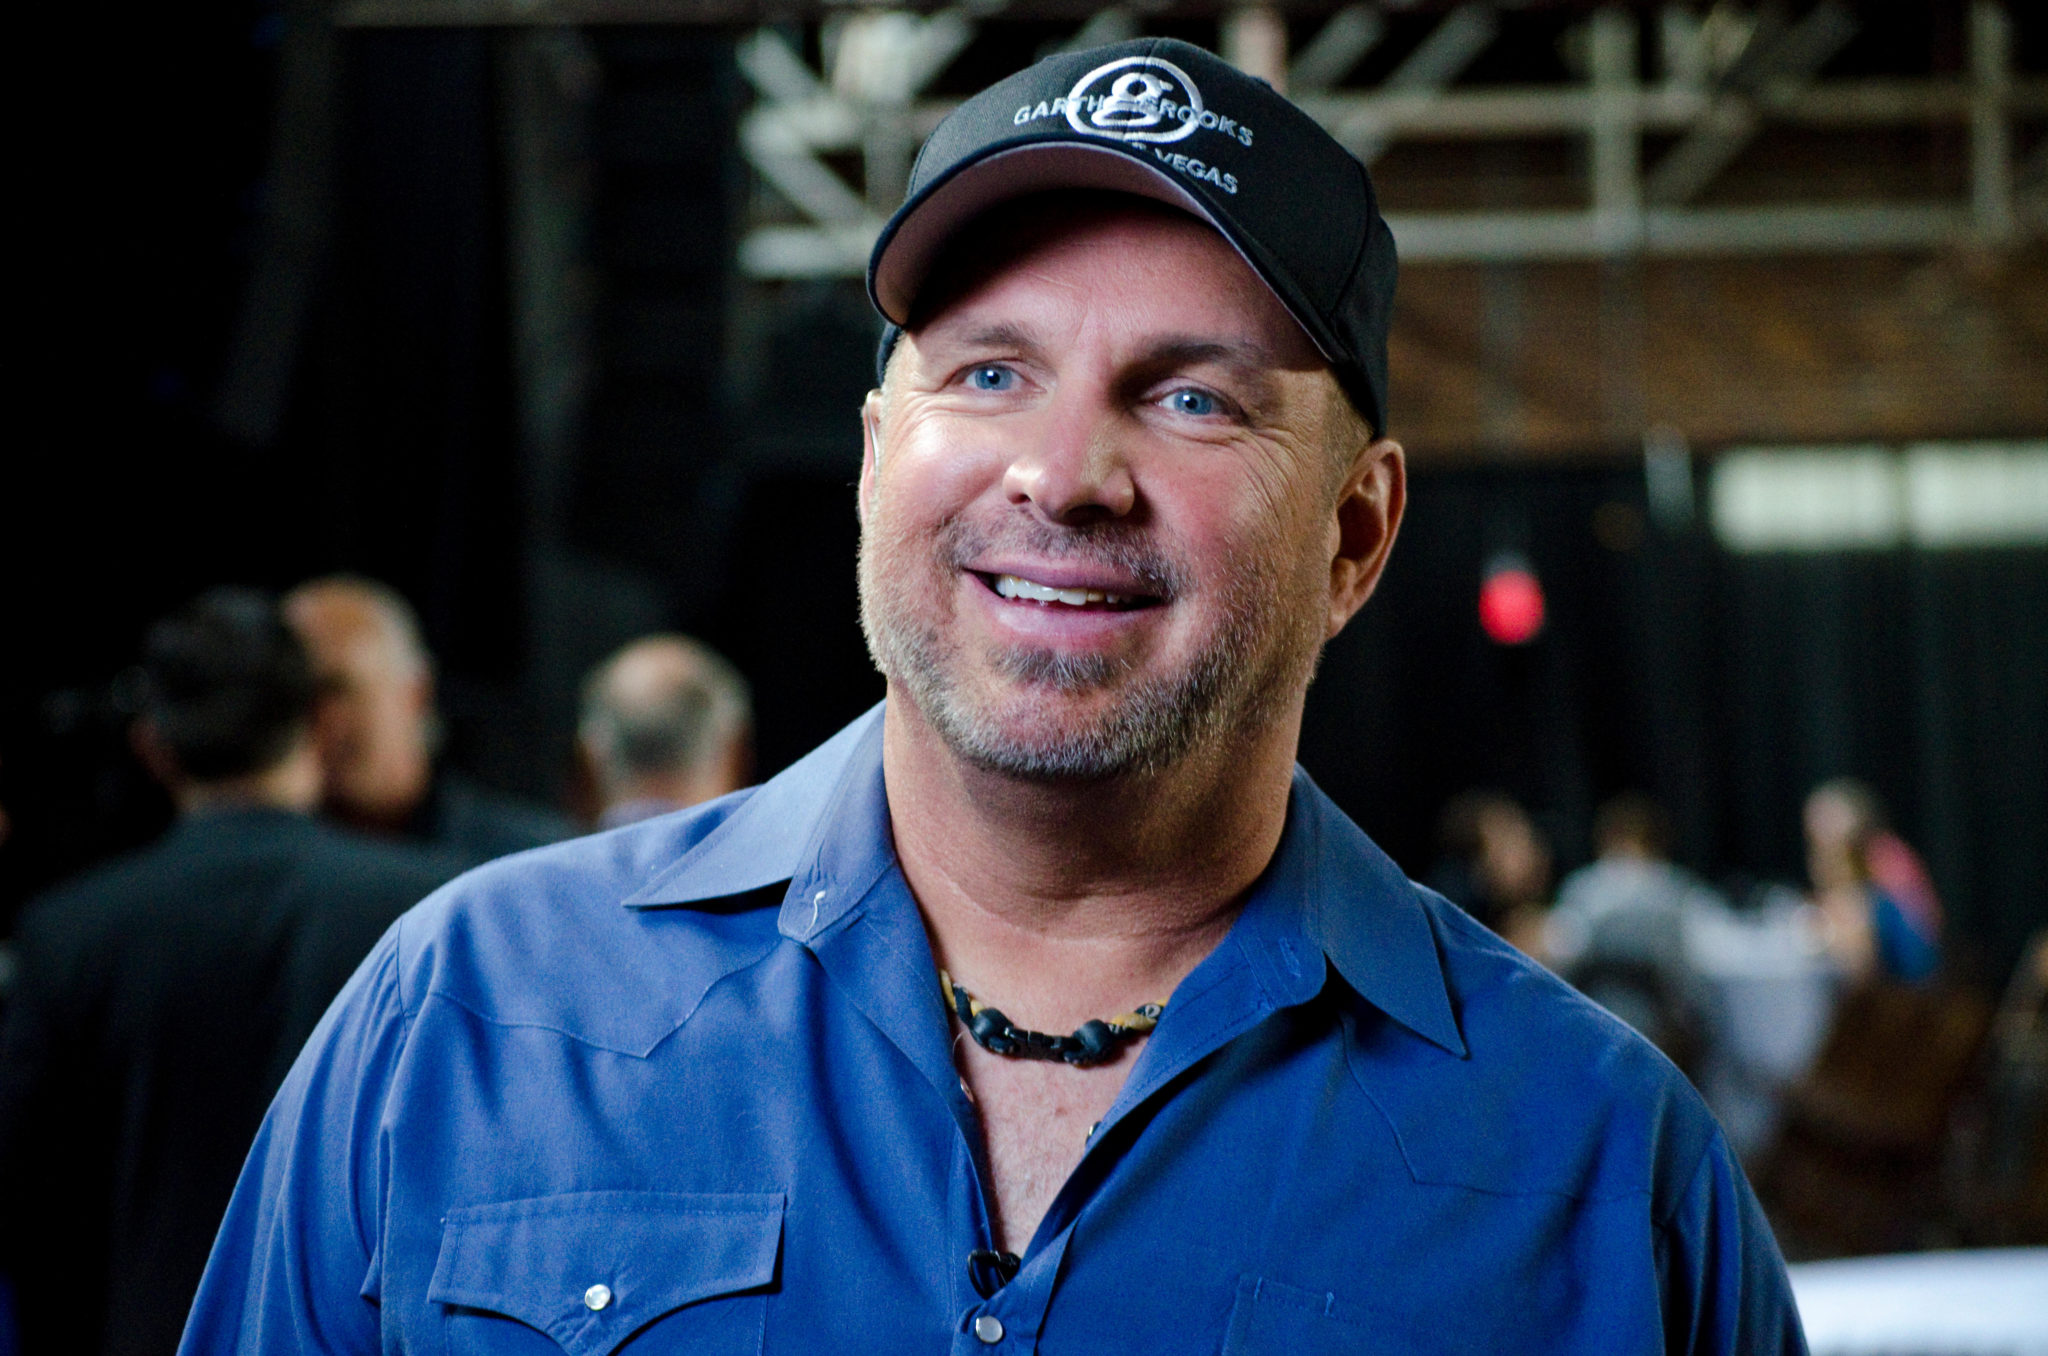 Garth Brooks: After Croke Park, I'm going back to my roots